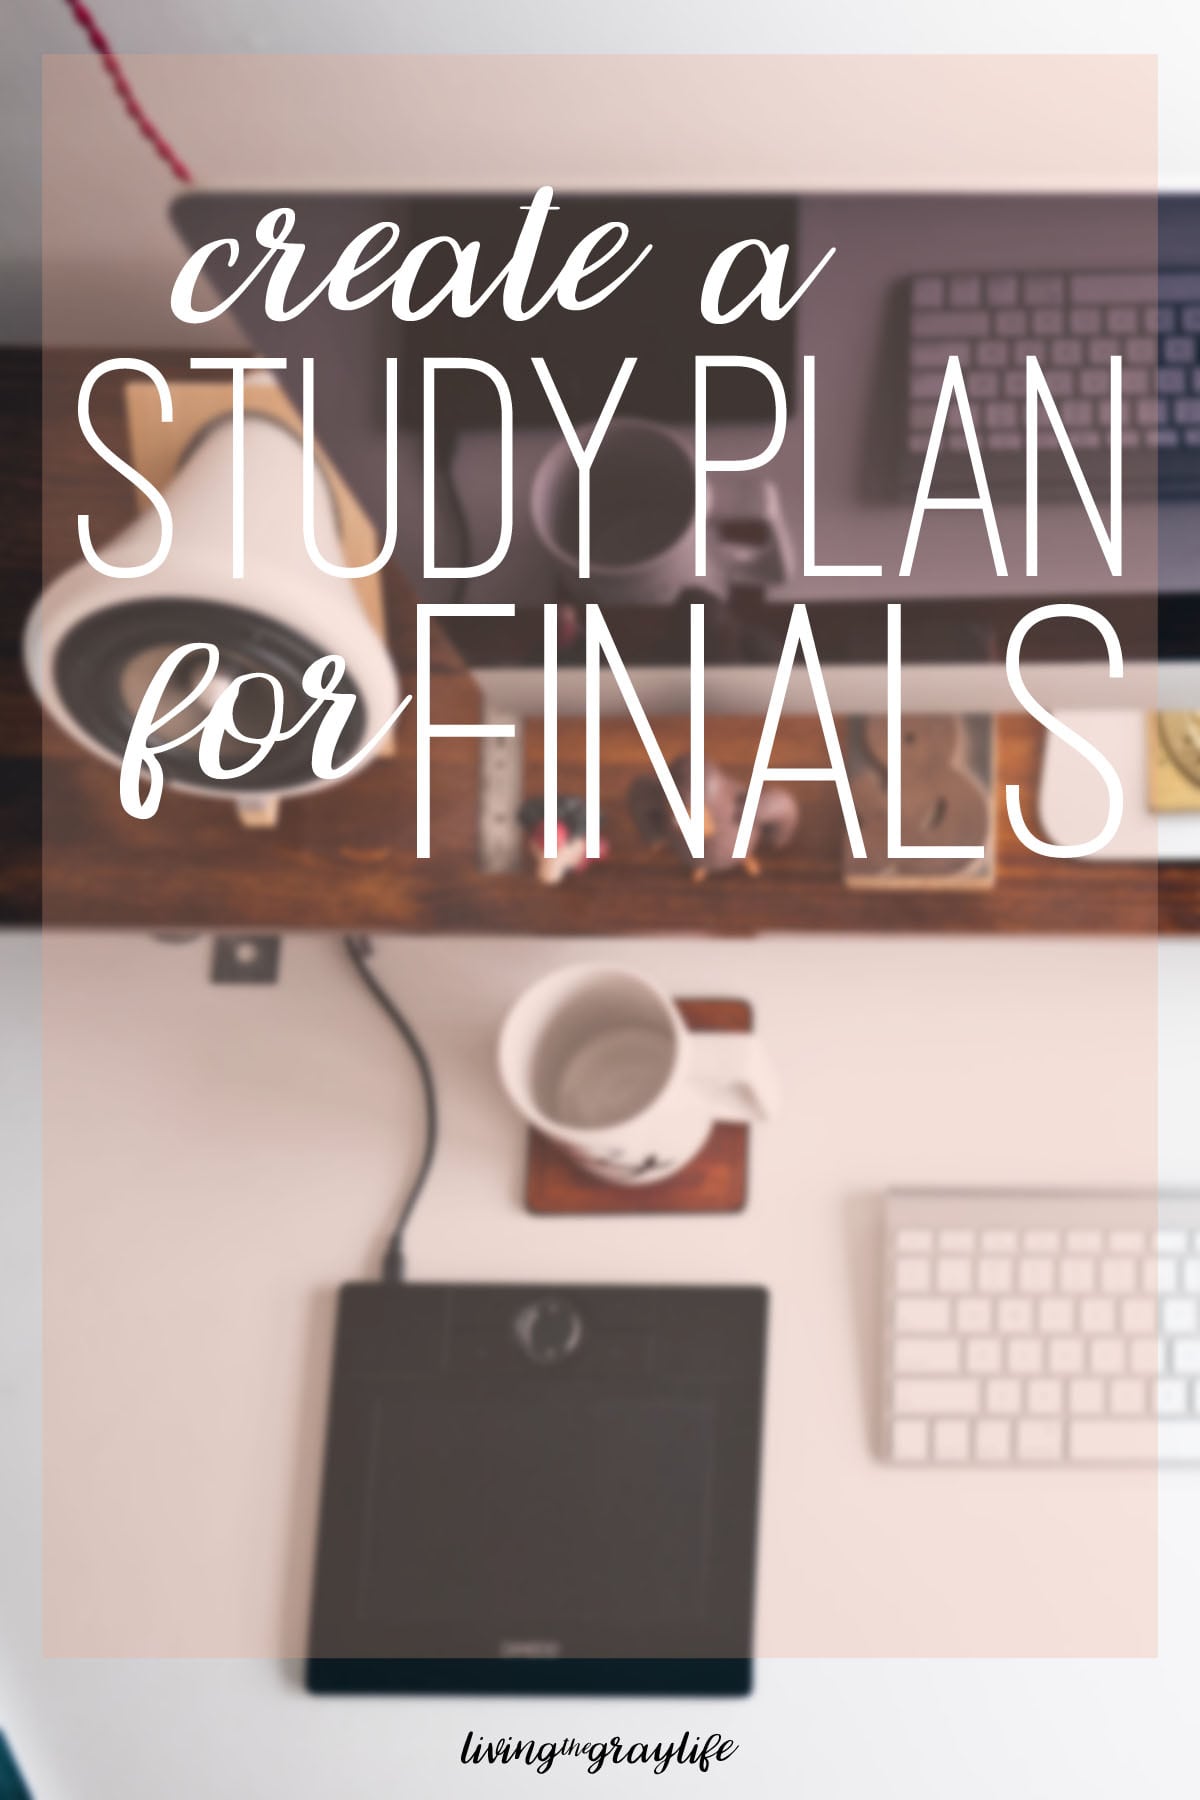 Don't fall behind this finals season! Create your very own finals study plan to make sure you get those A's and avoid all the unnecessary stress.